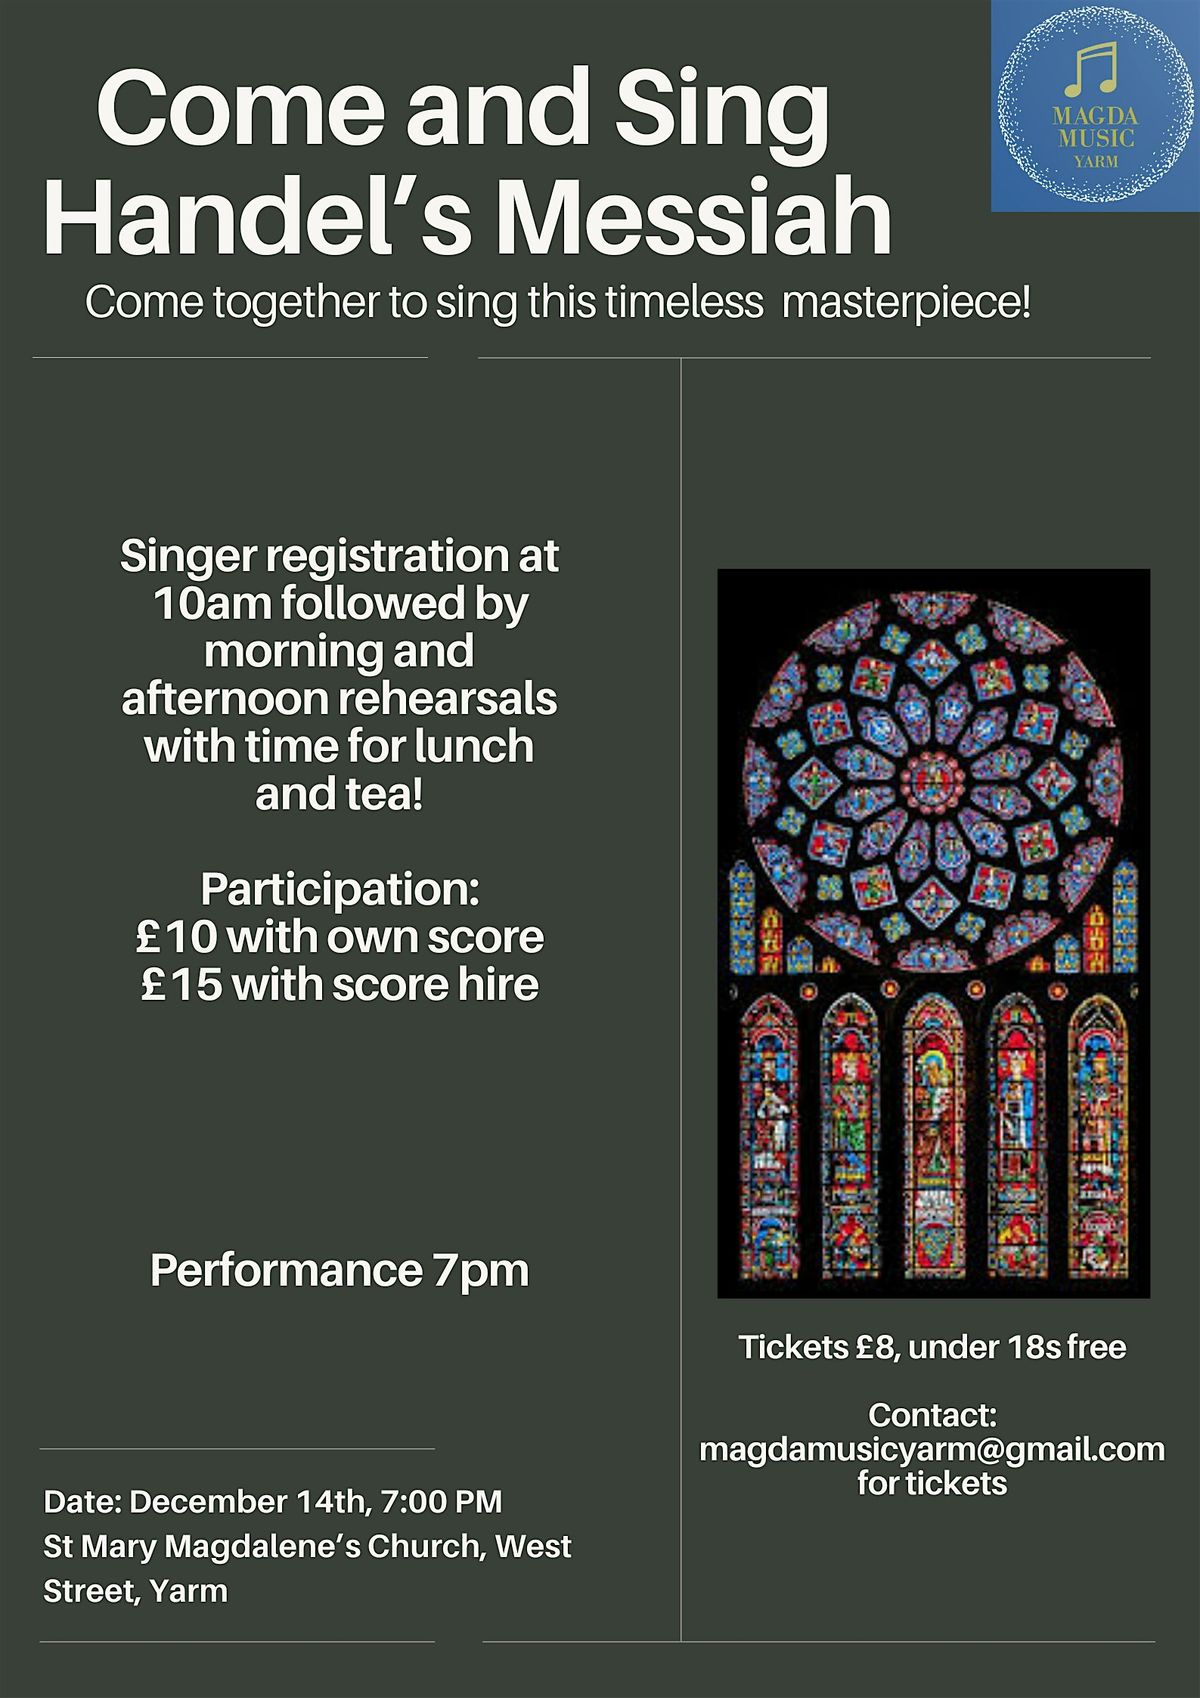 Come and Sing Handel's Messiah!